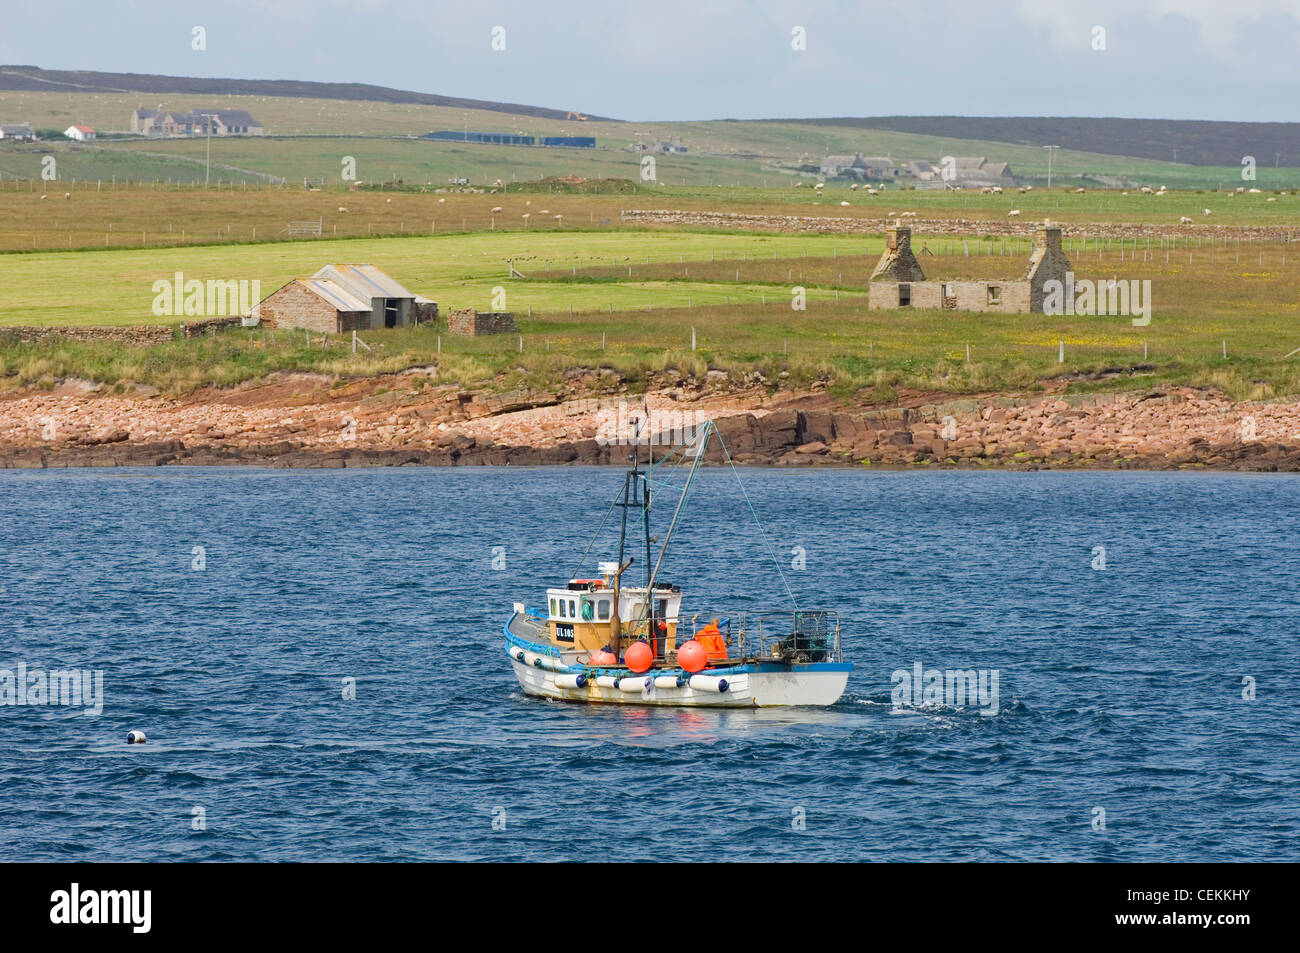 Lobster fishing off the coast of Eday, Orkney Islands, Scotland. Stock Photo